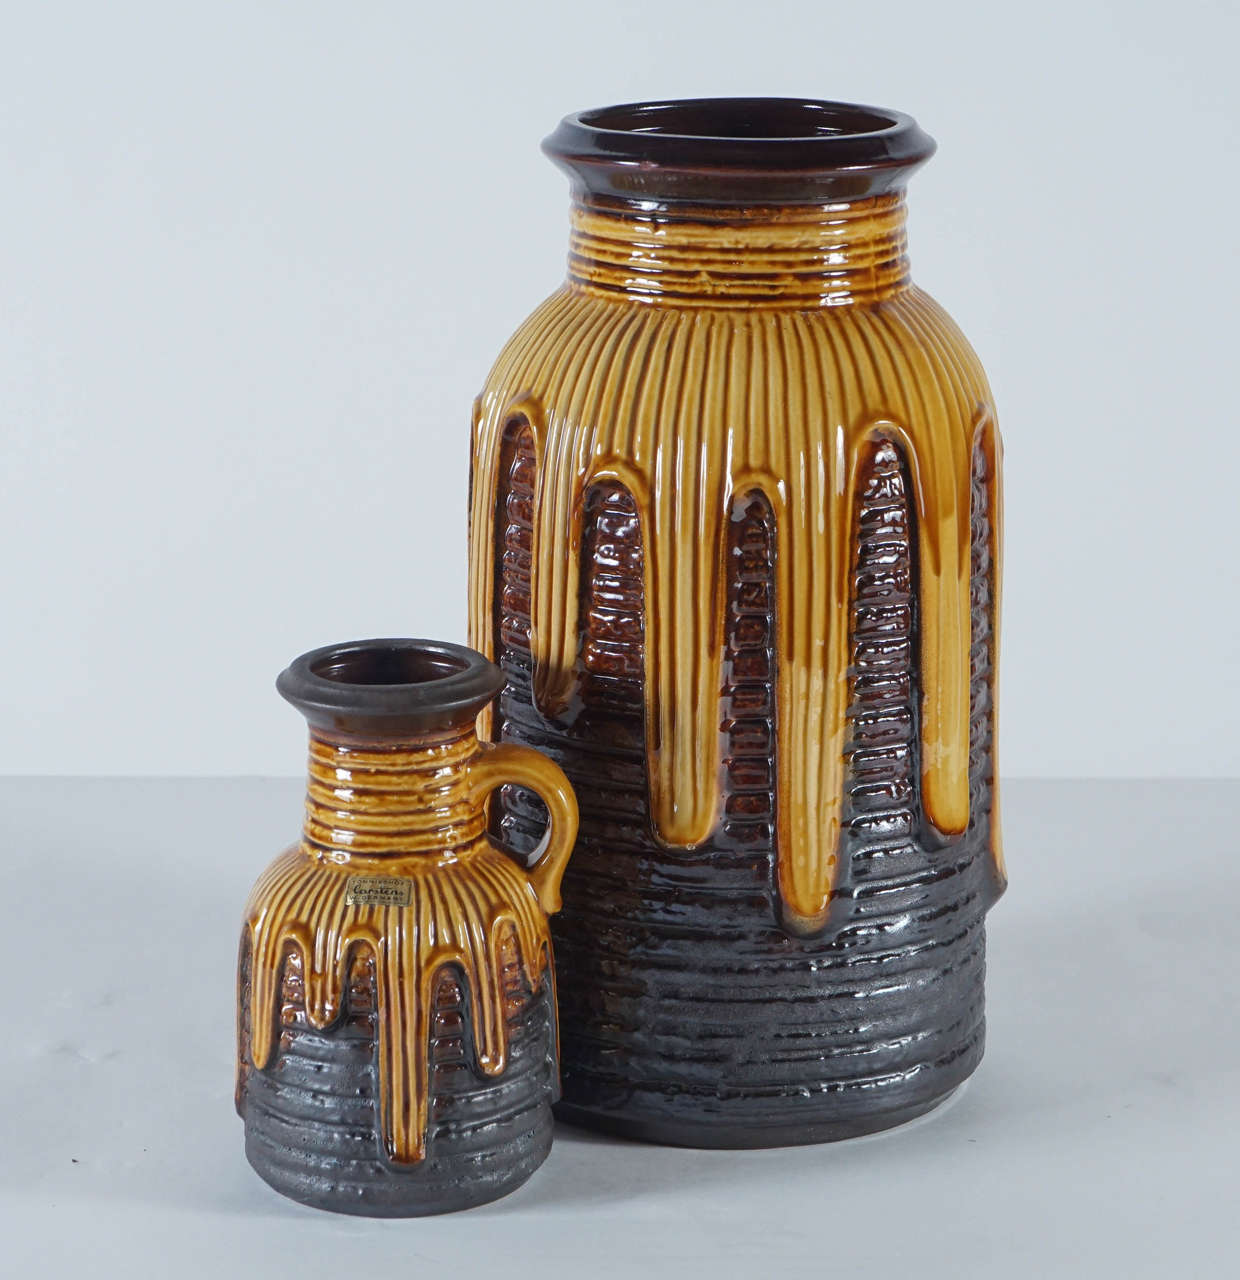 A pair of West German Pottery vessels in a rarely seen “honeypot” style. Honey yellow and chocolate glazes in haute-relief. No cracks or repairs. Mint vintage condition. Smaller ewer: 5 3/4